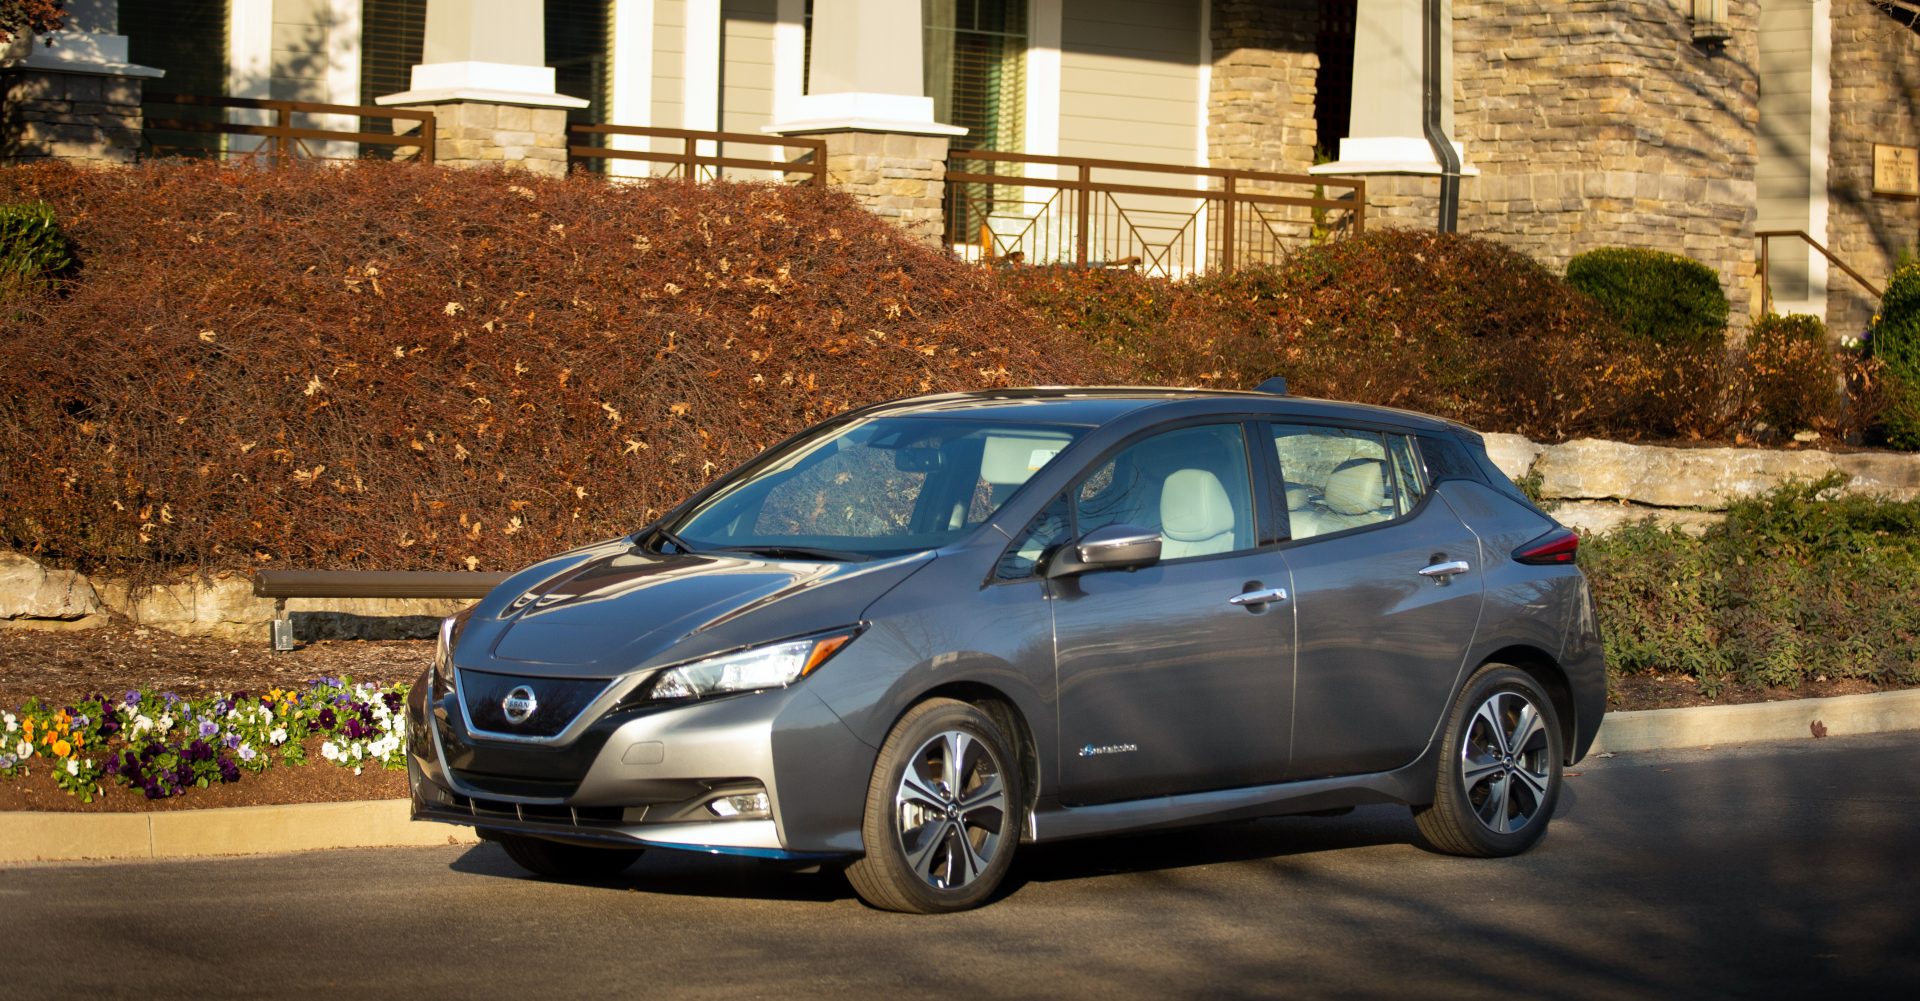 The 2022 Nissan LEAF SL PLUS offers more drive range and options for gas cars